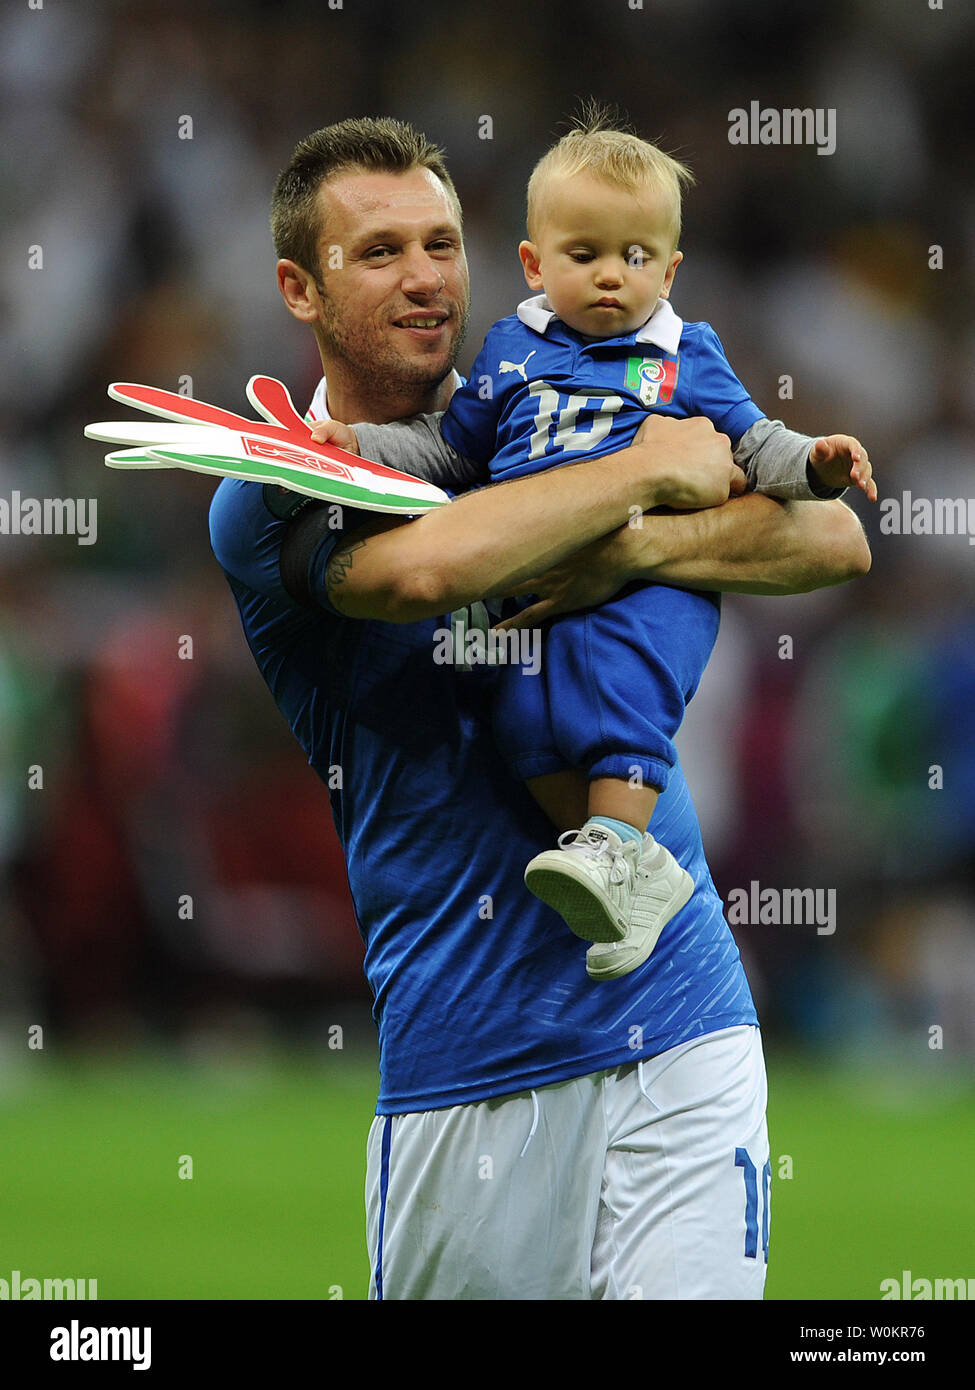 Antonio Cassano of Italy celebrates at full-time with his son following the Euro 2012 Semi-Final match at the National Stadium in Warsaw, Poland on June 28, 2012. UPI/Chris Brunskill Stock Photo